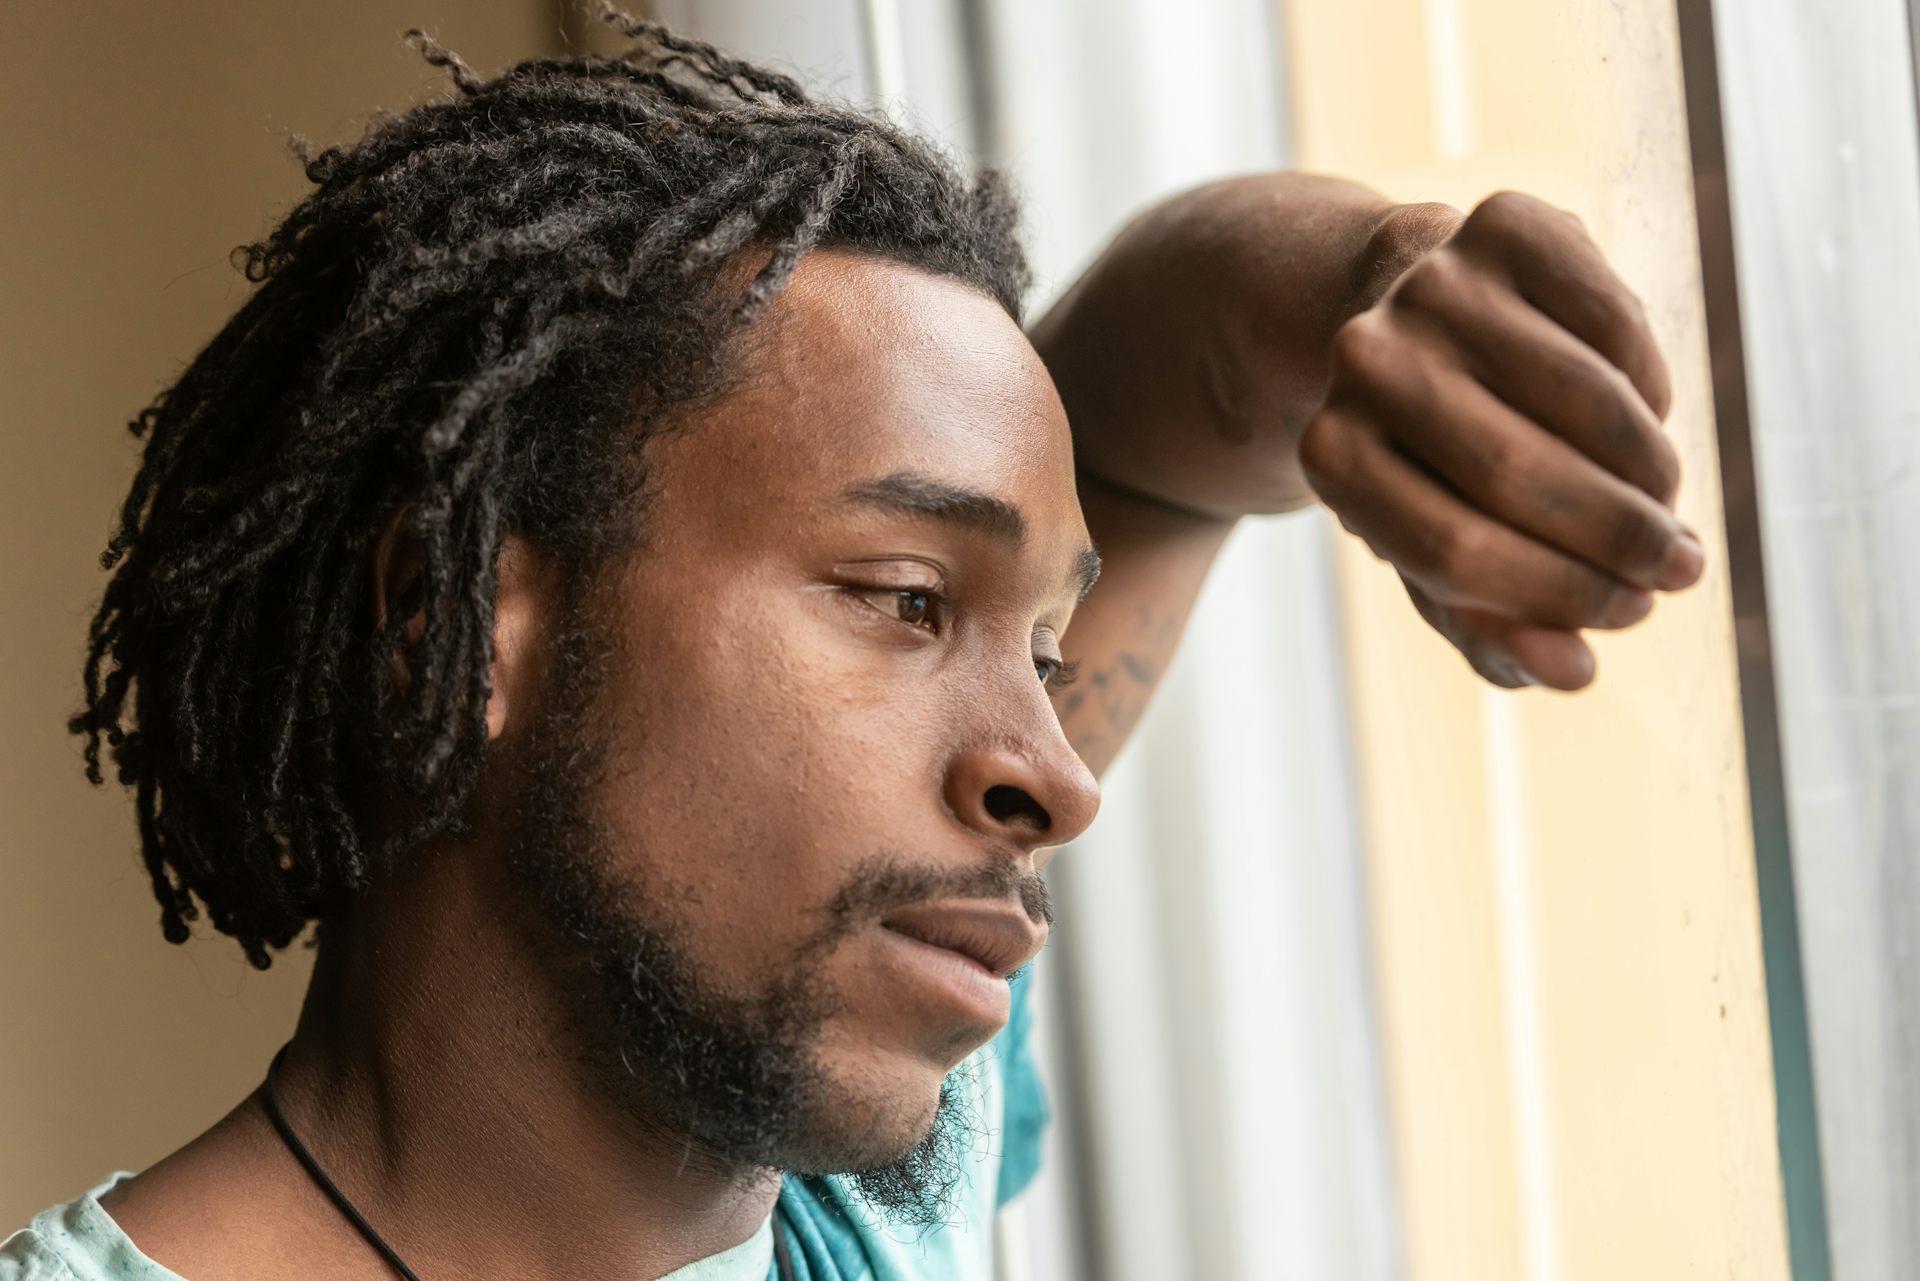 Black men face high discrimination and depression, even as their education and incomes rise pic